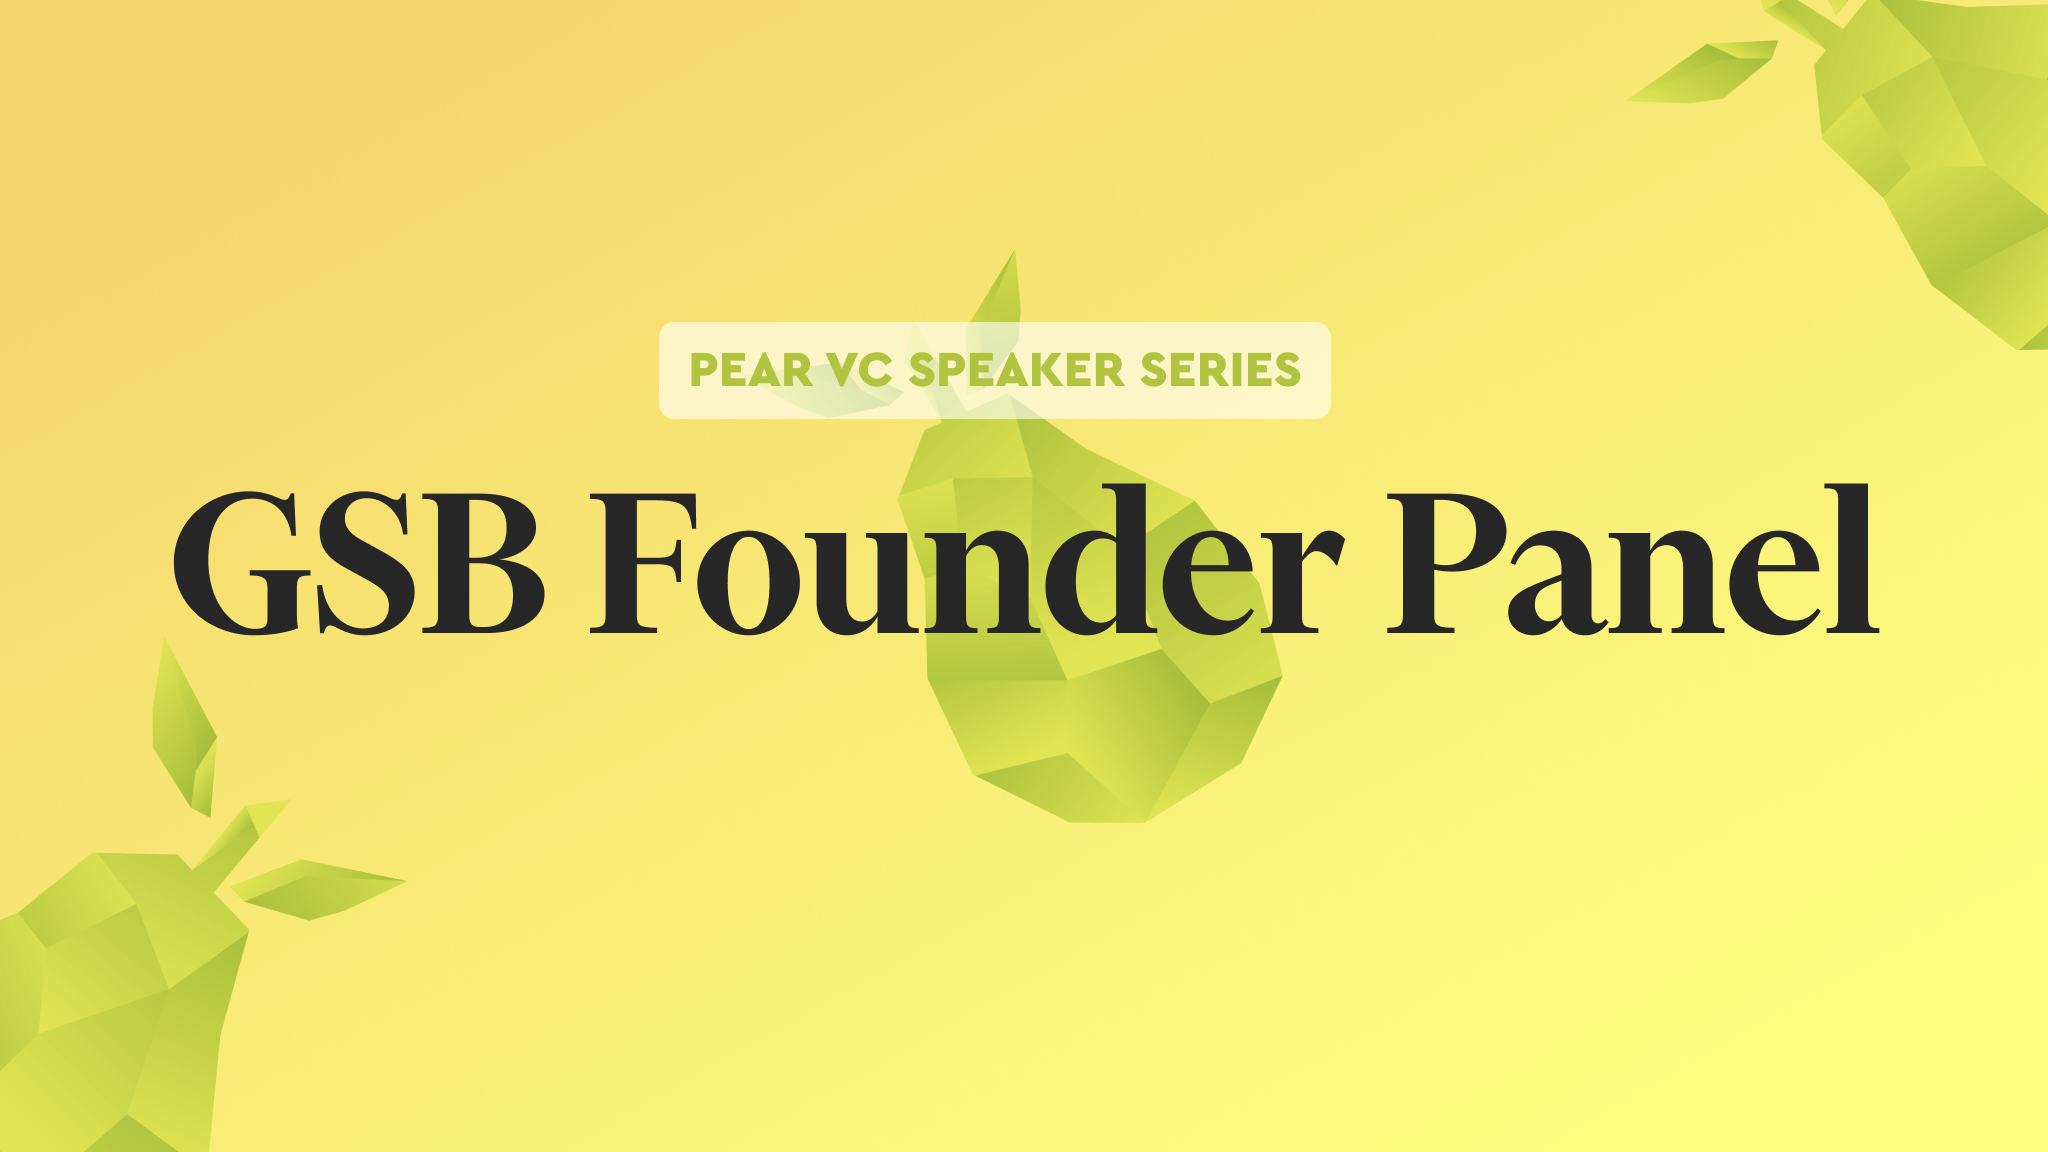 event Pear VC Speaker Series: GSB Founder Panel